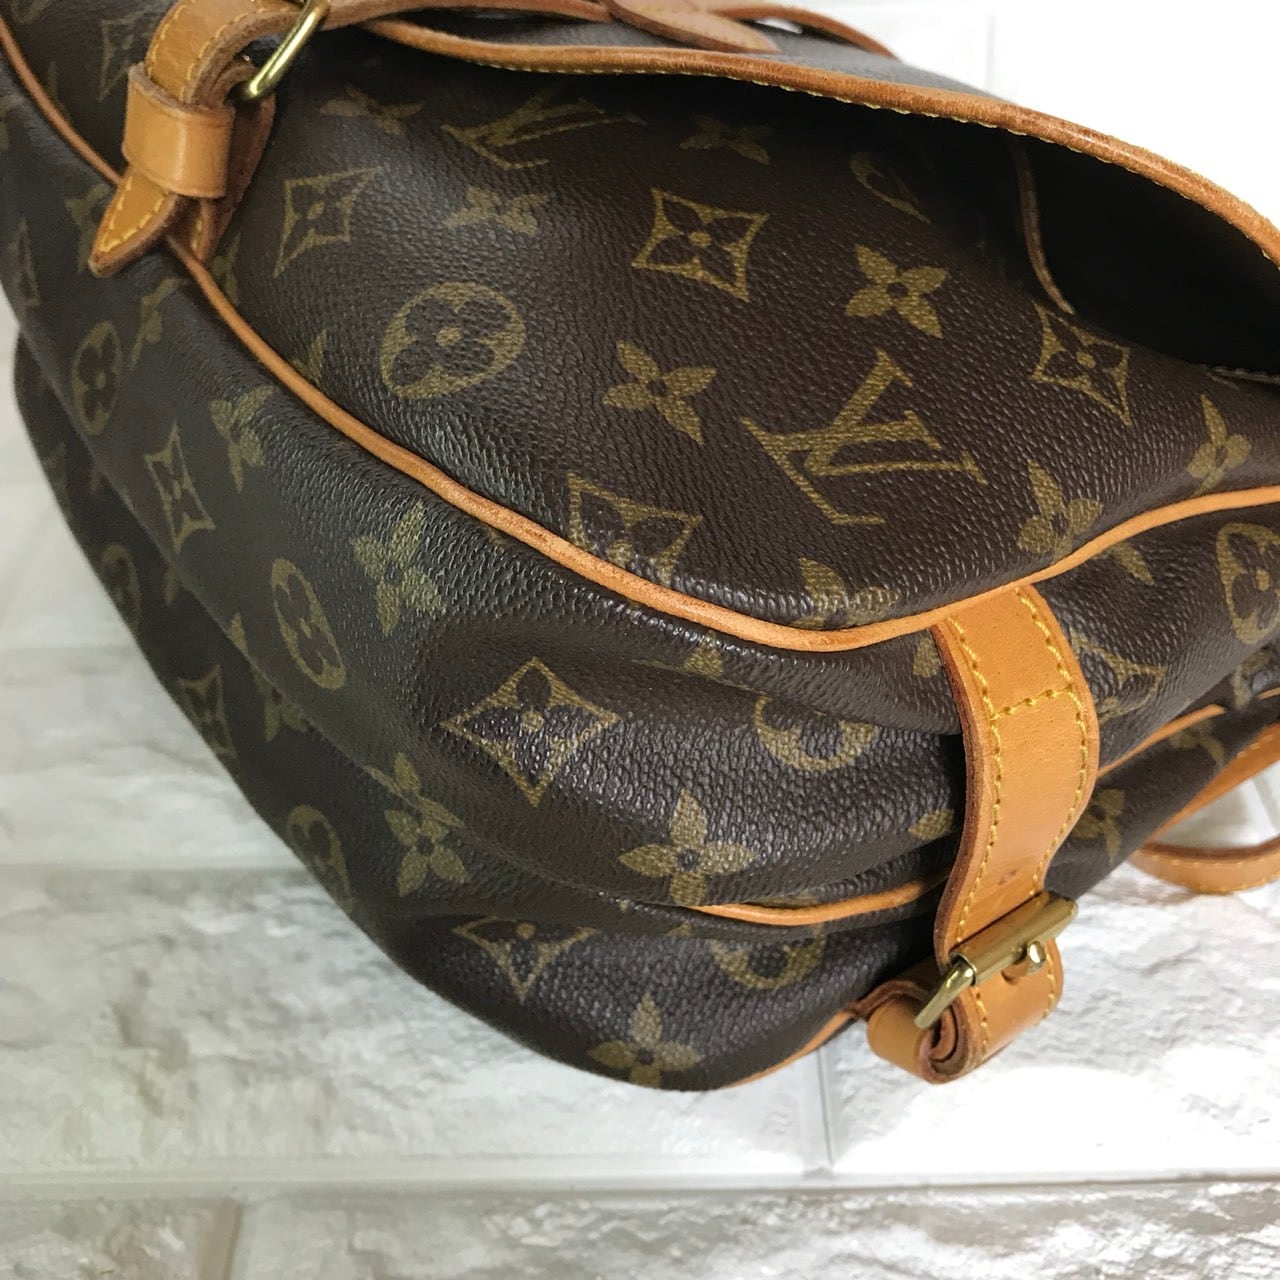 LOUIS VUITTON ルイヴィトン モノグラム ソミュール30 ショルダーバッグ | Unique Brand  Shop《ルイヴィトン多数出品中》 powered by BASE